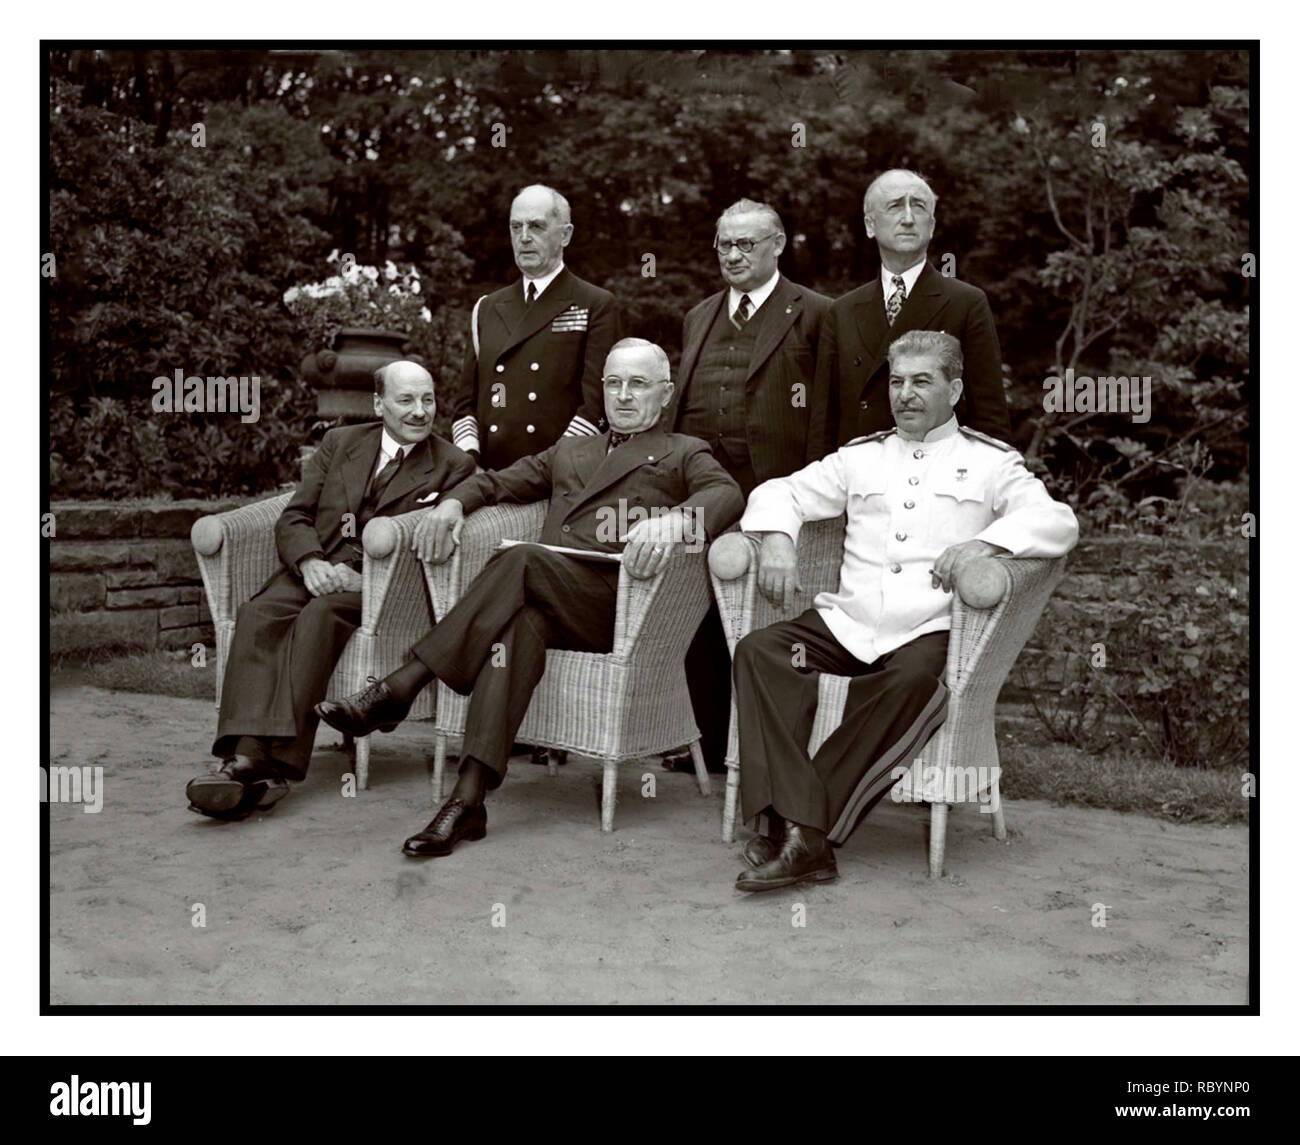 Leaders of the “Big Three” countries of the anti-Hitler coalition at the Potsdam conference: British Prime Minister (since July 28, 1945) Clement Attlee, US President Harry Truman, Chairman of the USSR Council of People’s Commissars and Chairman of the State Defense Committee of the USSR, Joseph Stalin. The Potsdam conference was held in Potsdam from July 17 to August 2, 1945 with the aim of determining the further steps for the post-war arrangement of Europe. Location: Potsdam, Germany Date: July-August 1945 Stock Photo